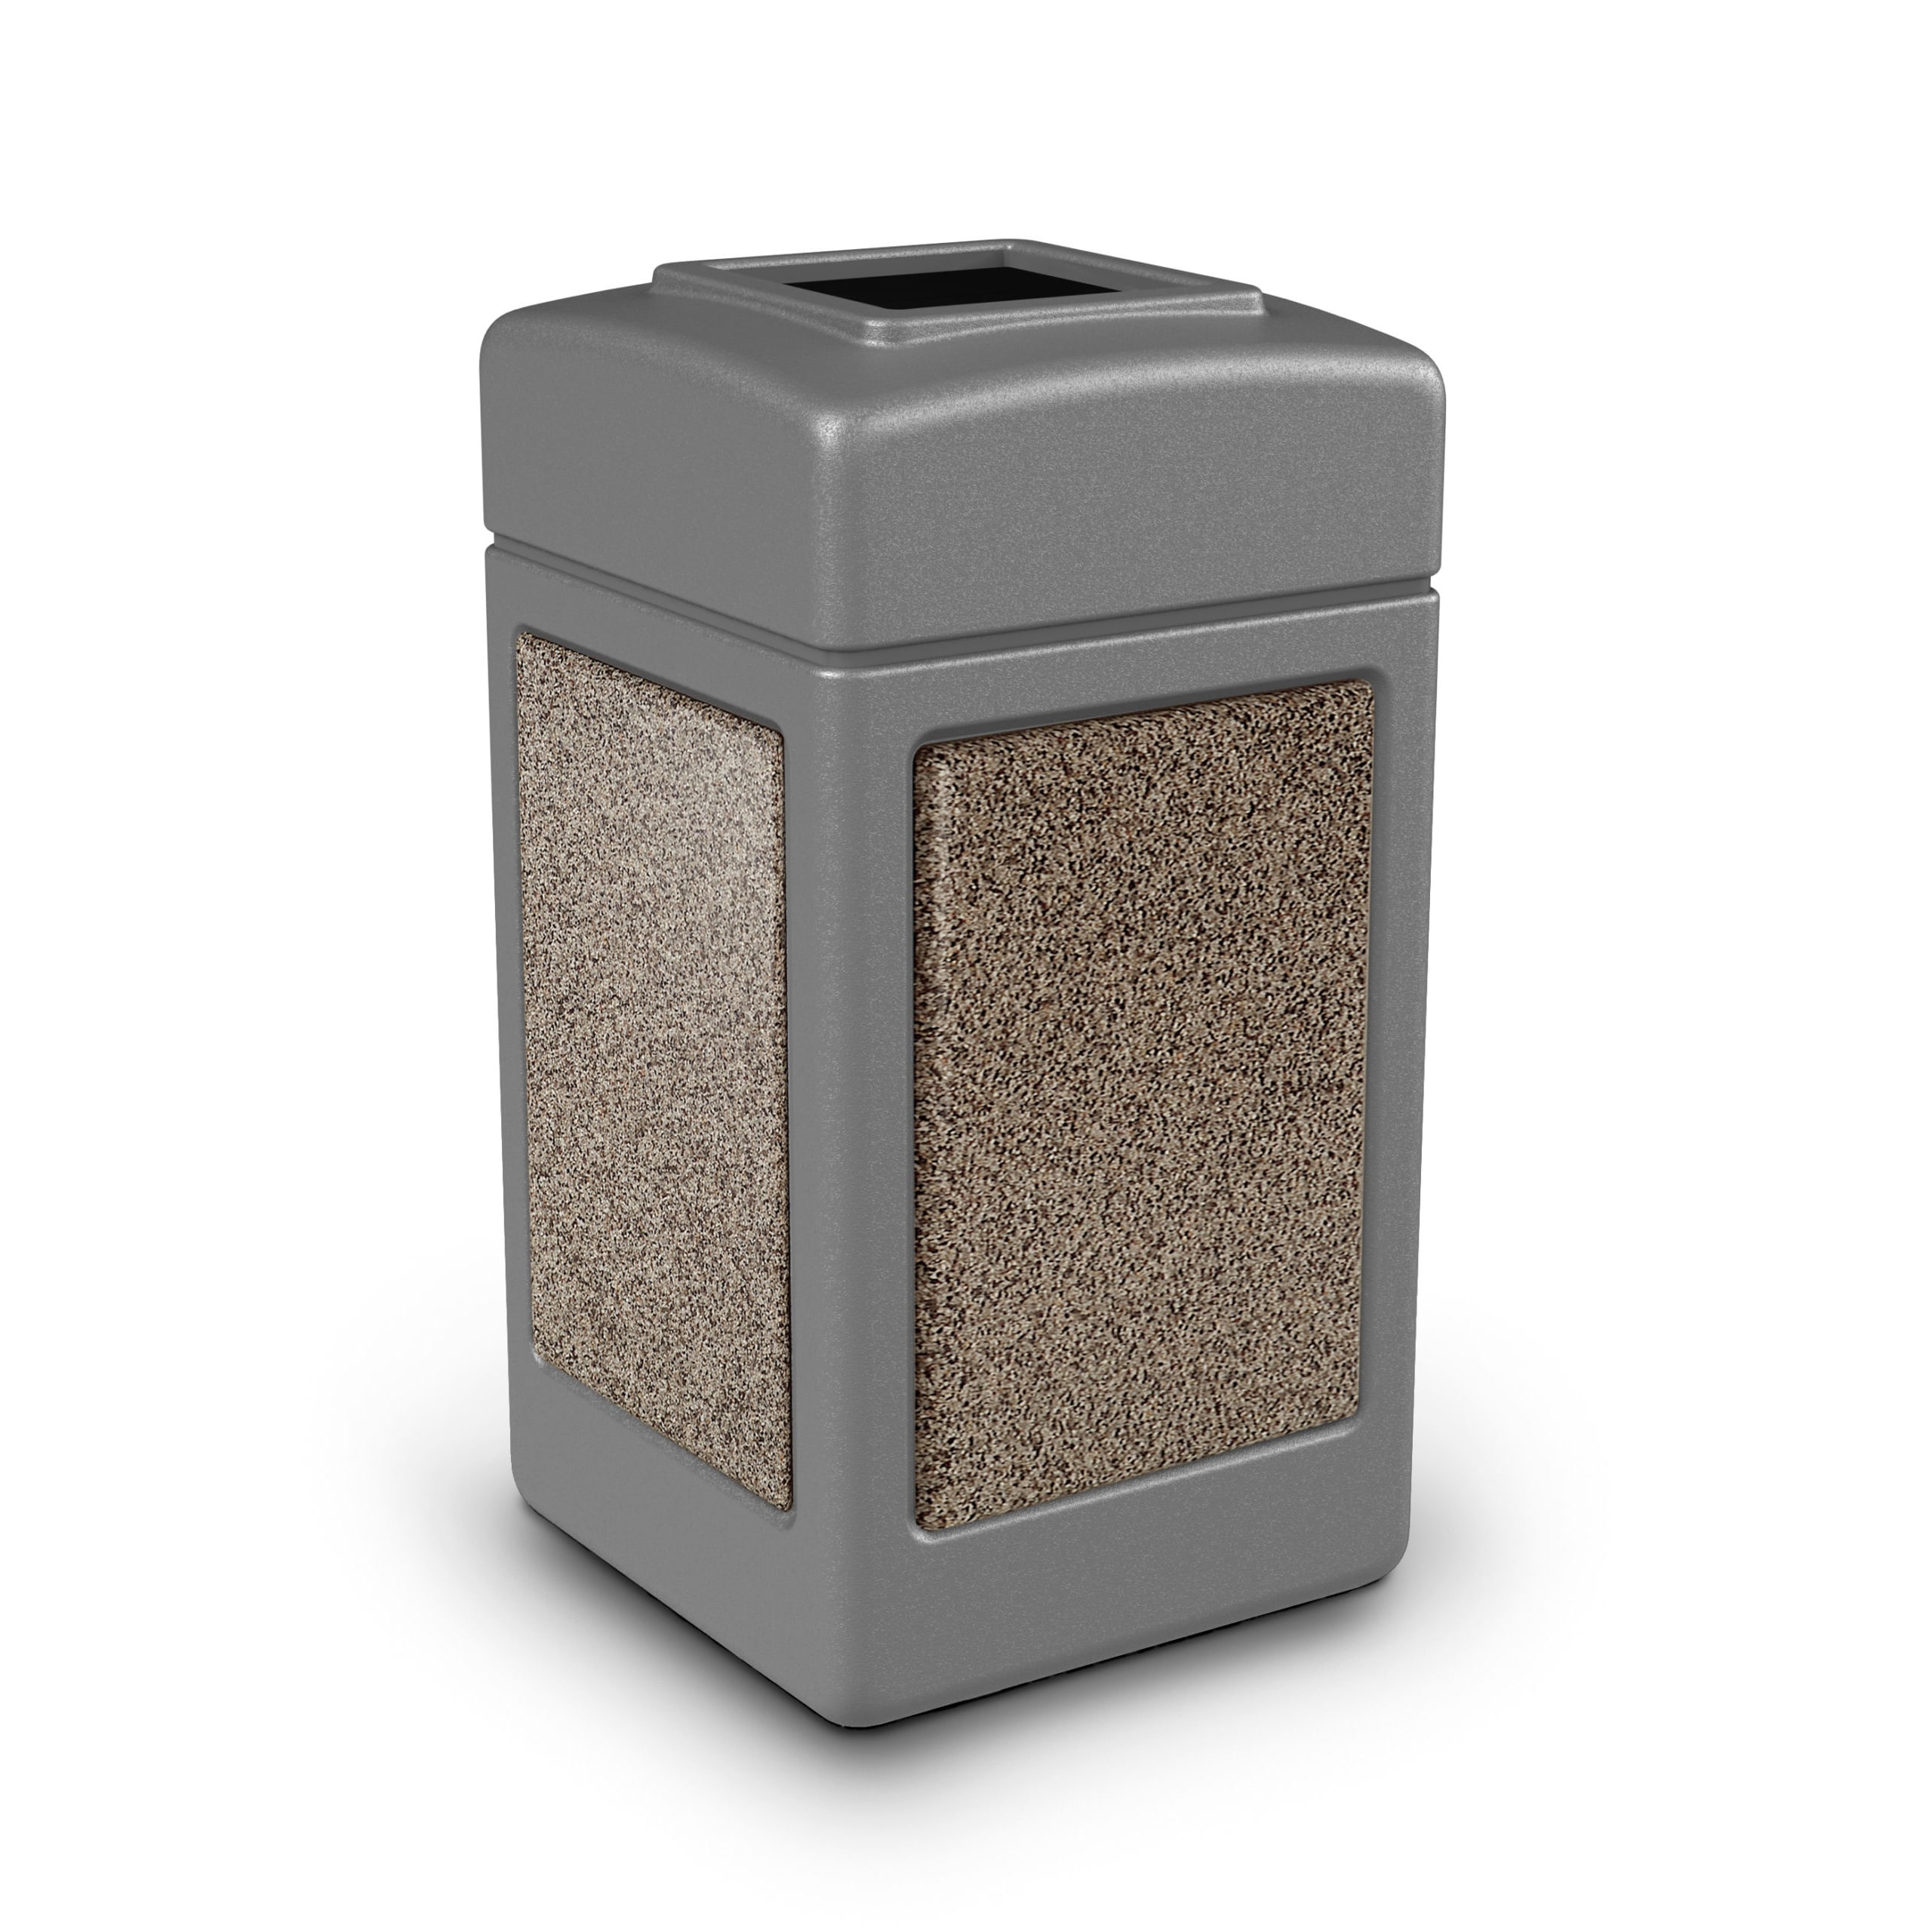 https://www.commercialzone.com/wp-content/uploads/2022/09/720345K-StoneTec-Series-42-Gallon-Square-Waste-Receptacle-Gray-Riverstone-scaled-1.jpg